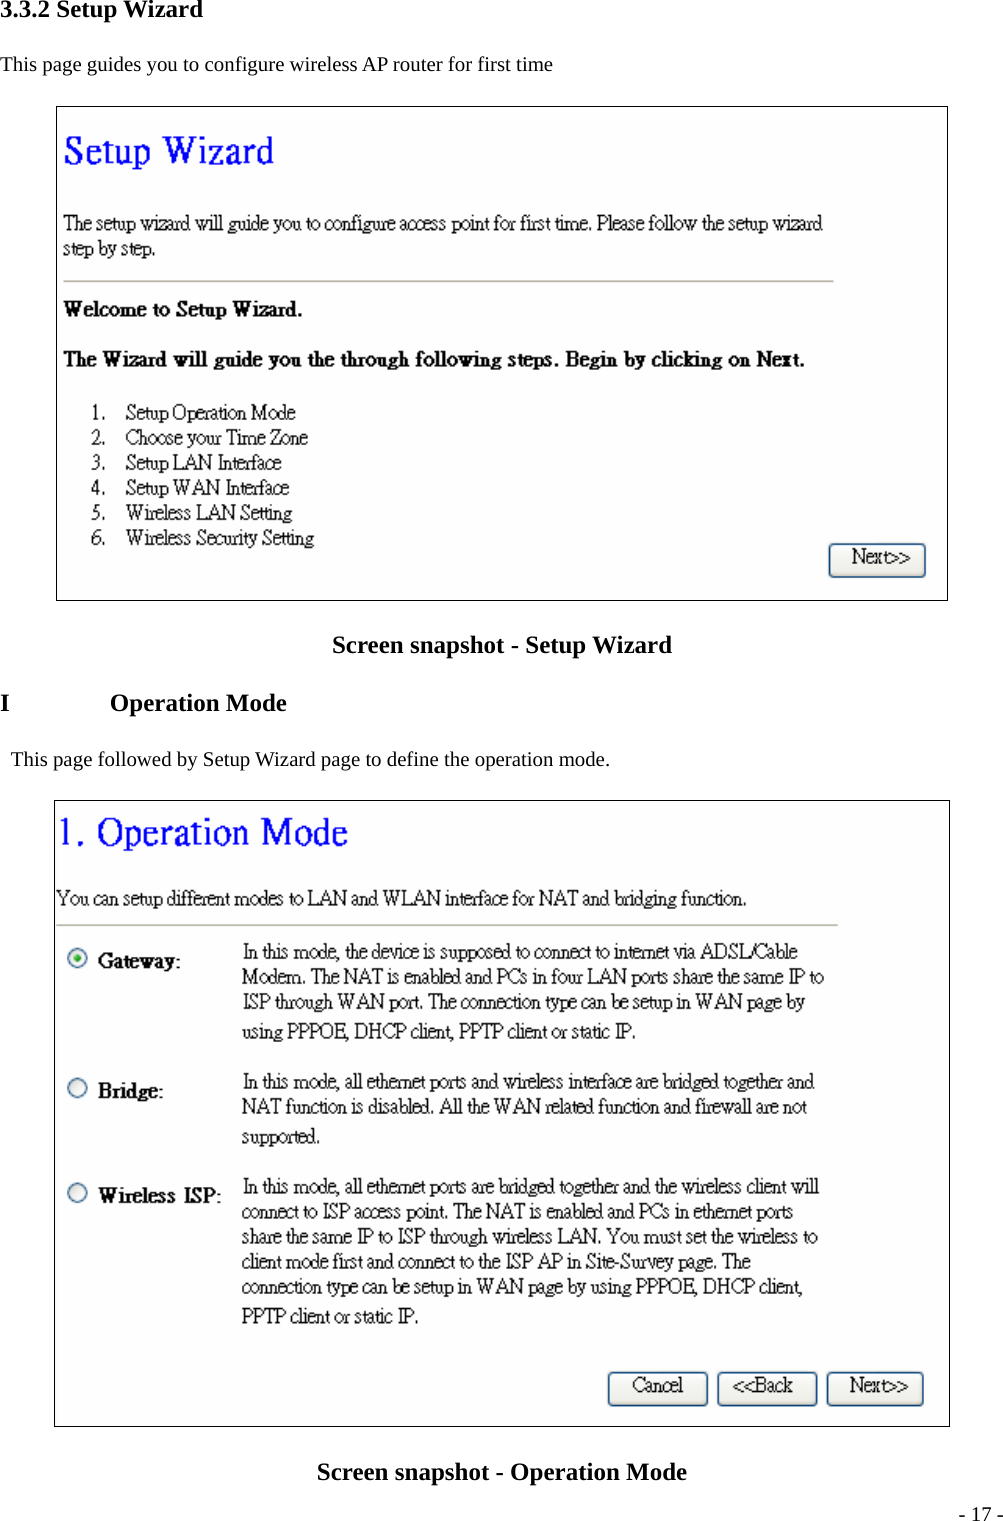 3.3.2 Setup Wizard This page guides you to configure wireless AP router for first time  Screen snapshot - Setup Wizard I        Operation Mode   This page followed by Setup Wizard page to define the operation mode.  Screen snapshot - Operation Mode  - 17 -